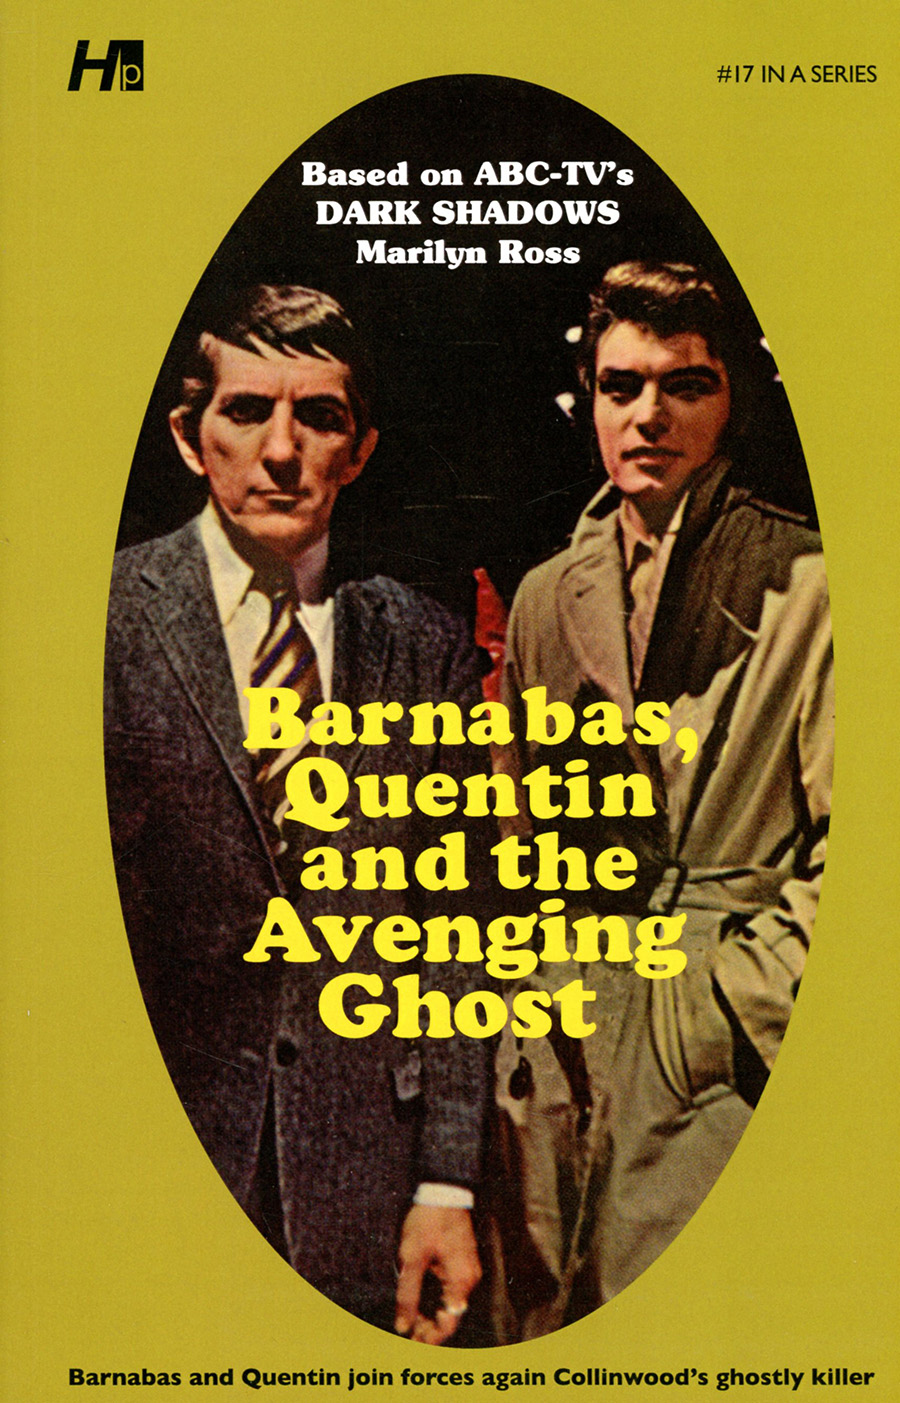 Dark Shadows Paperback Library Novel Vol 17 Barnabas Quentin And The Avenging Ghost TP